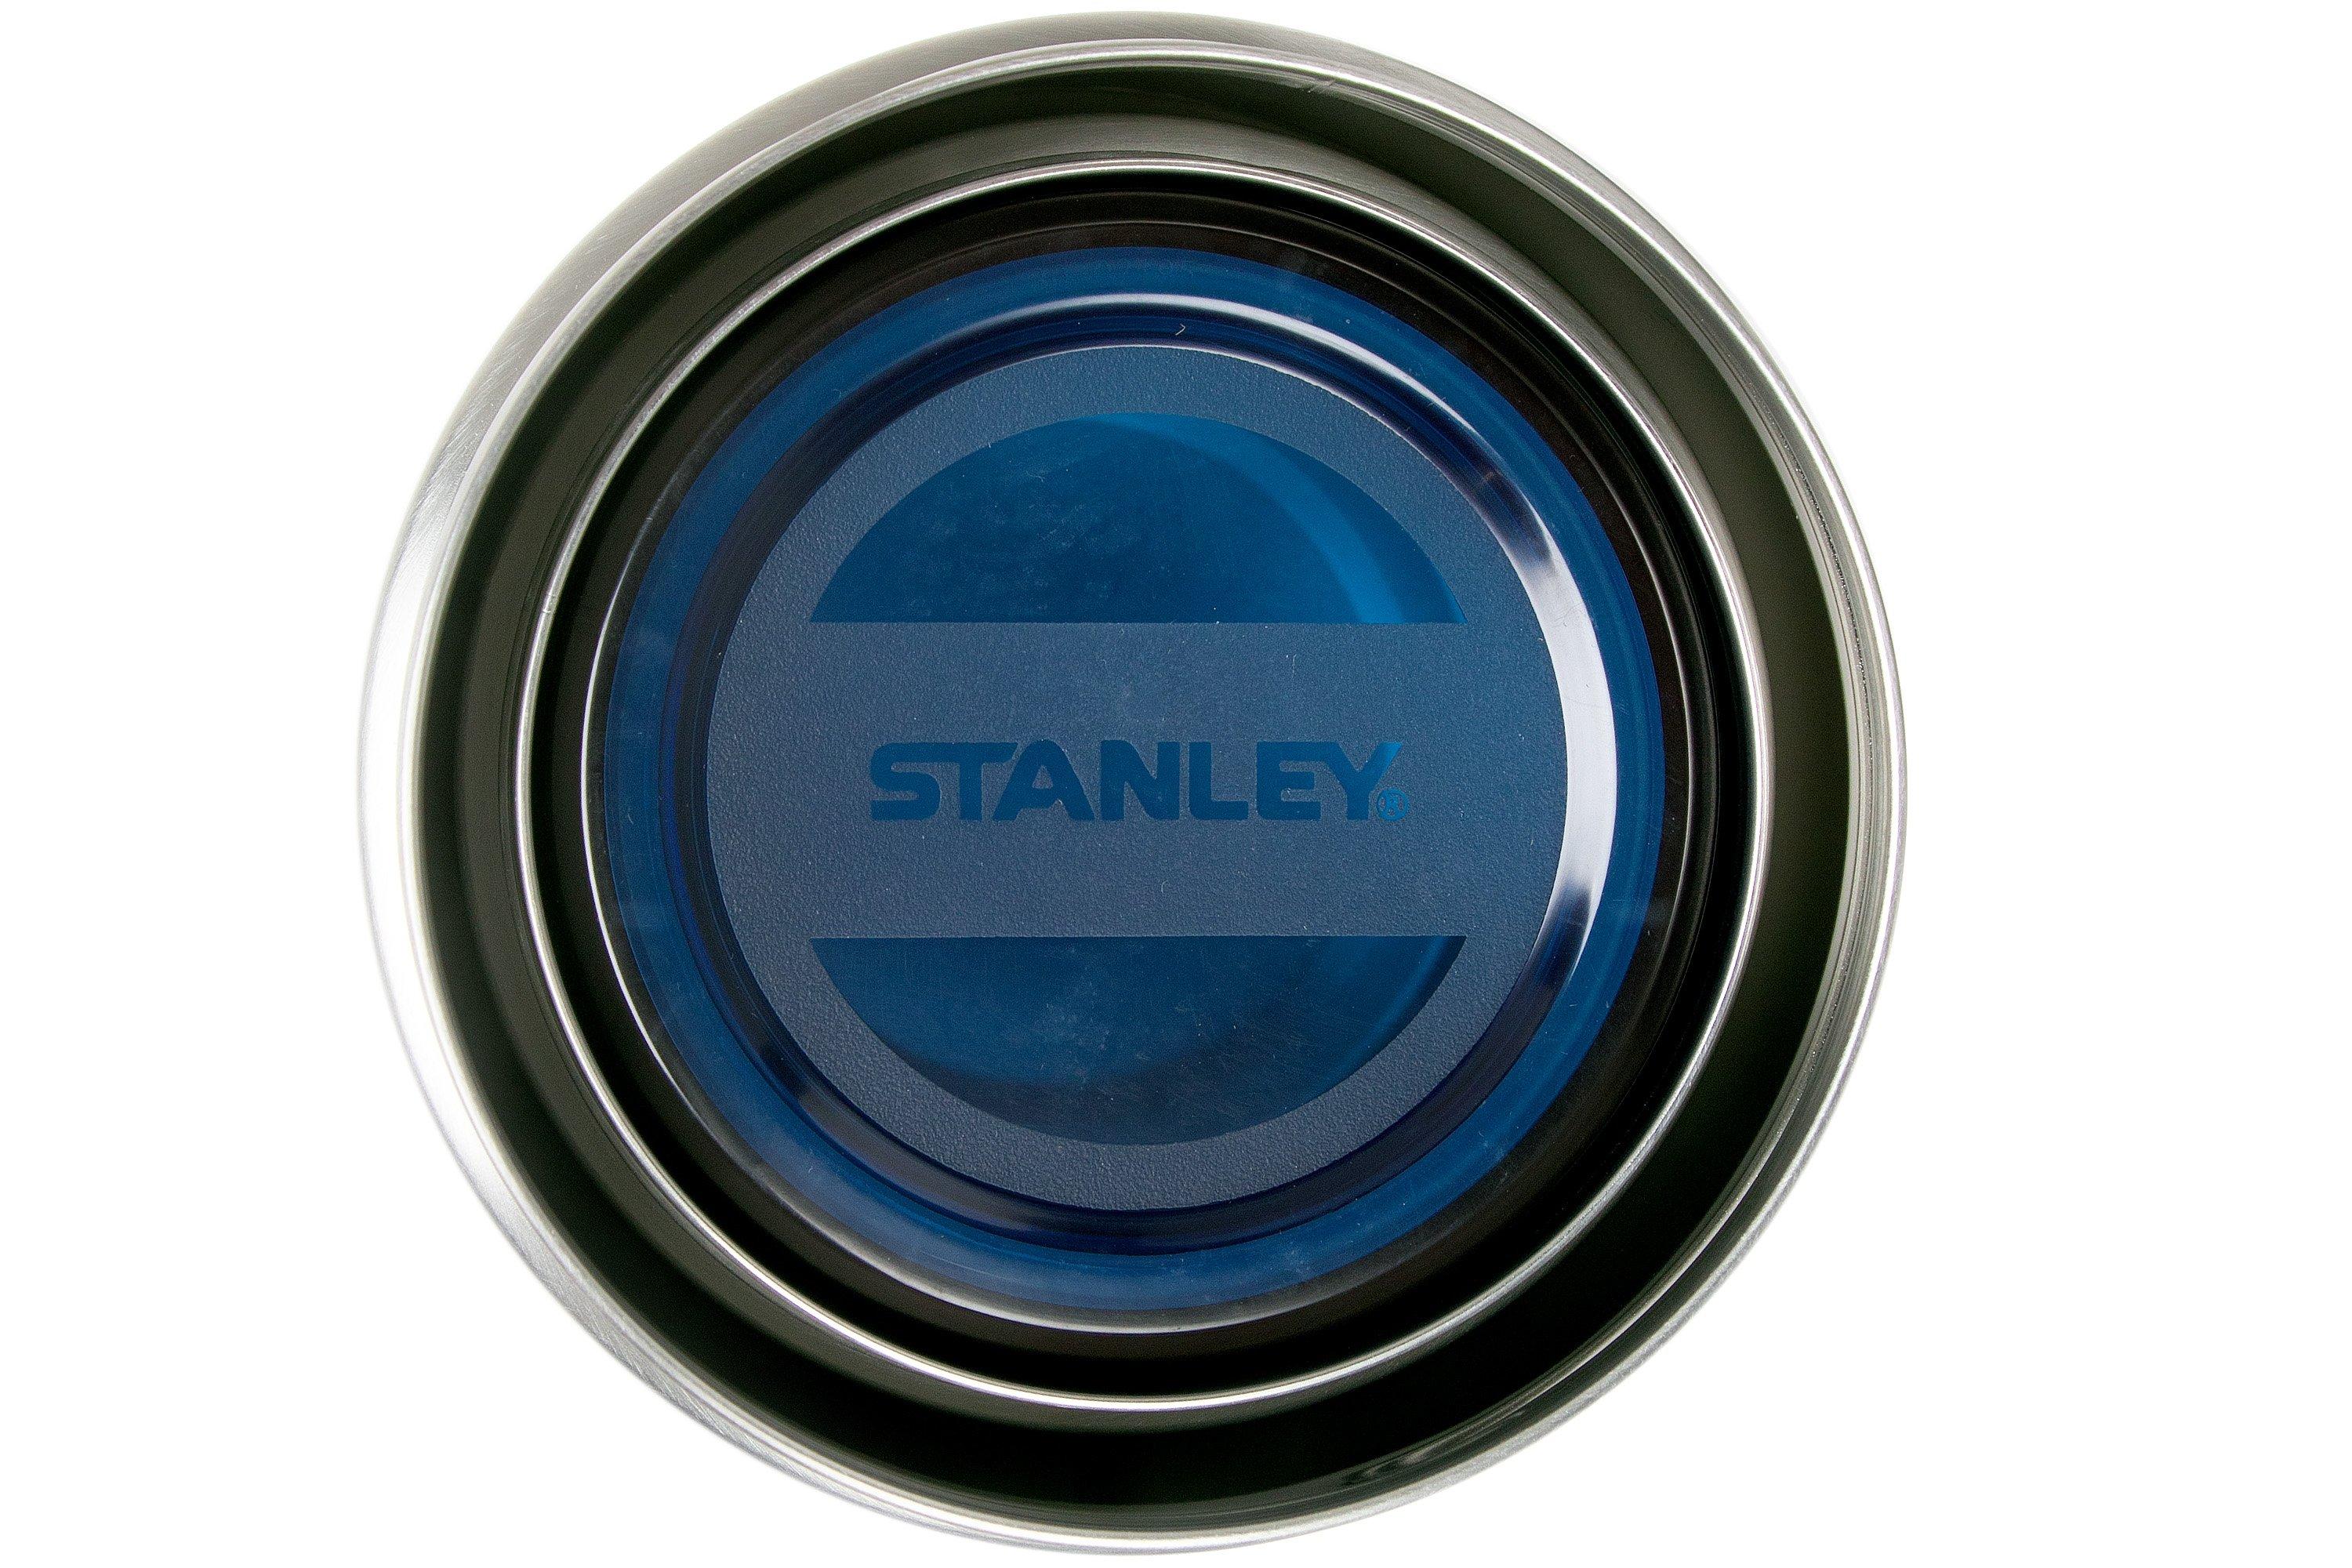 Stanley Nesting Steel Canisters stainless steel bowl set 3-piece